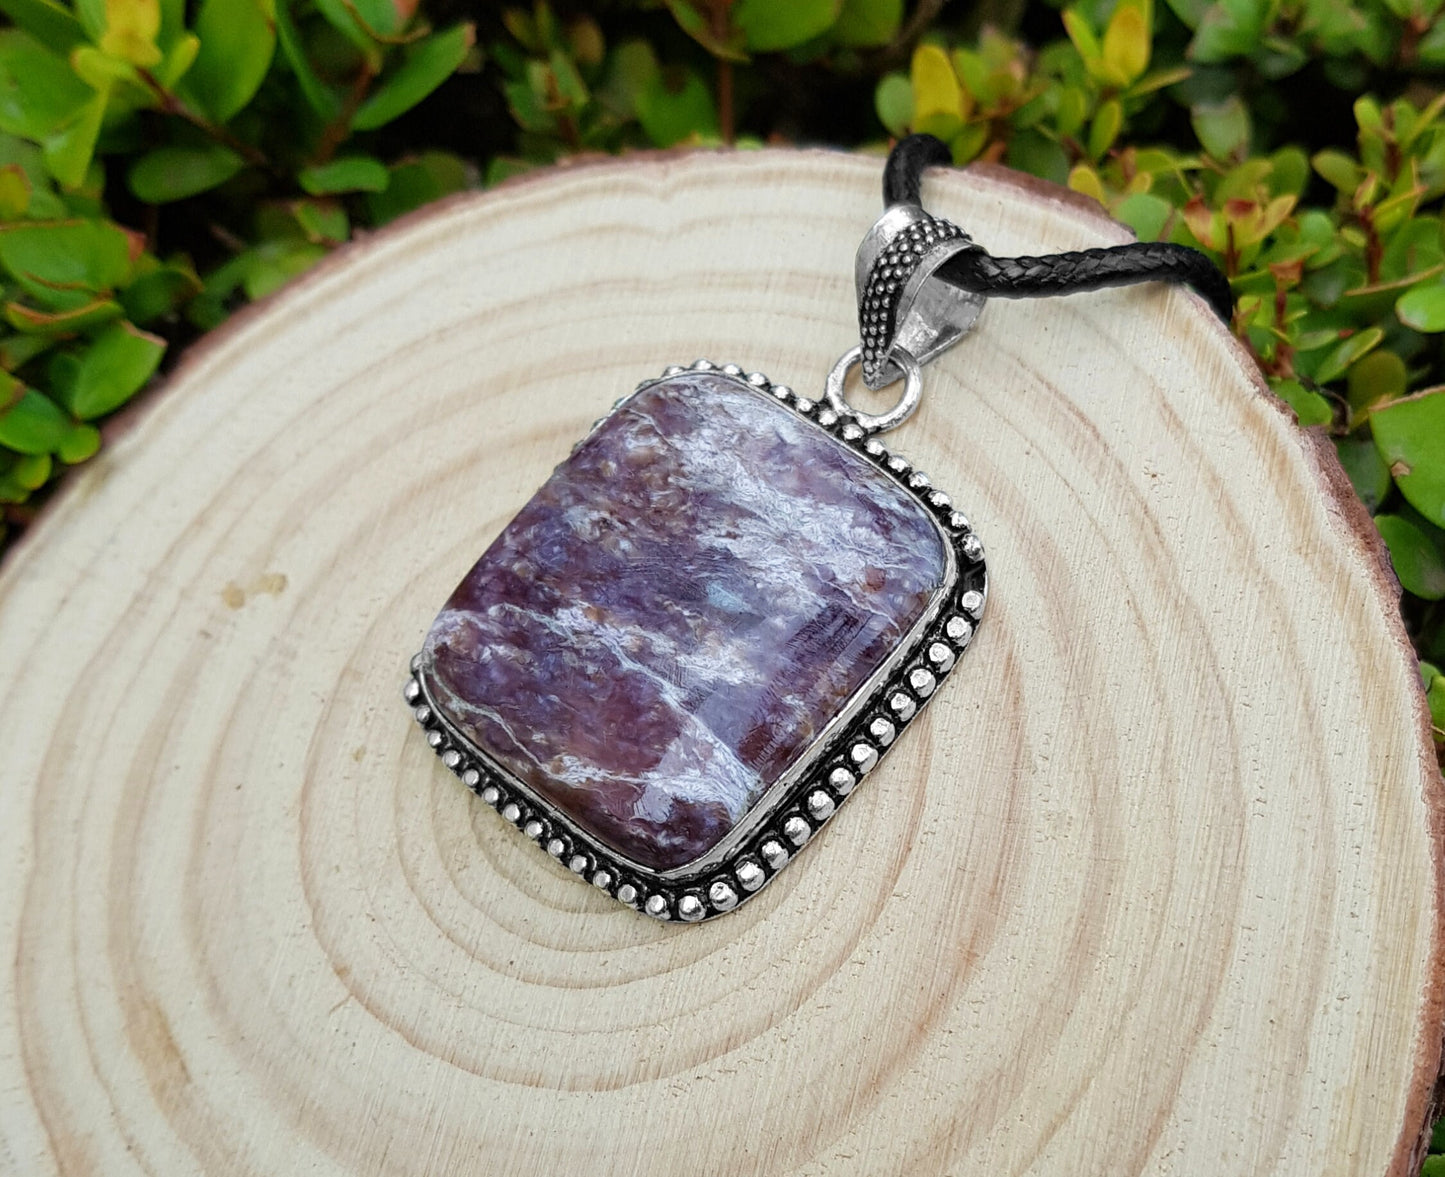 Charoite Statement Necklace Sterling Silver Oval Pendant Boho Gemstone Necklace Ethnic Pendant Unique Gift